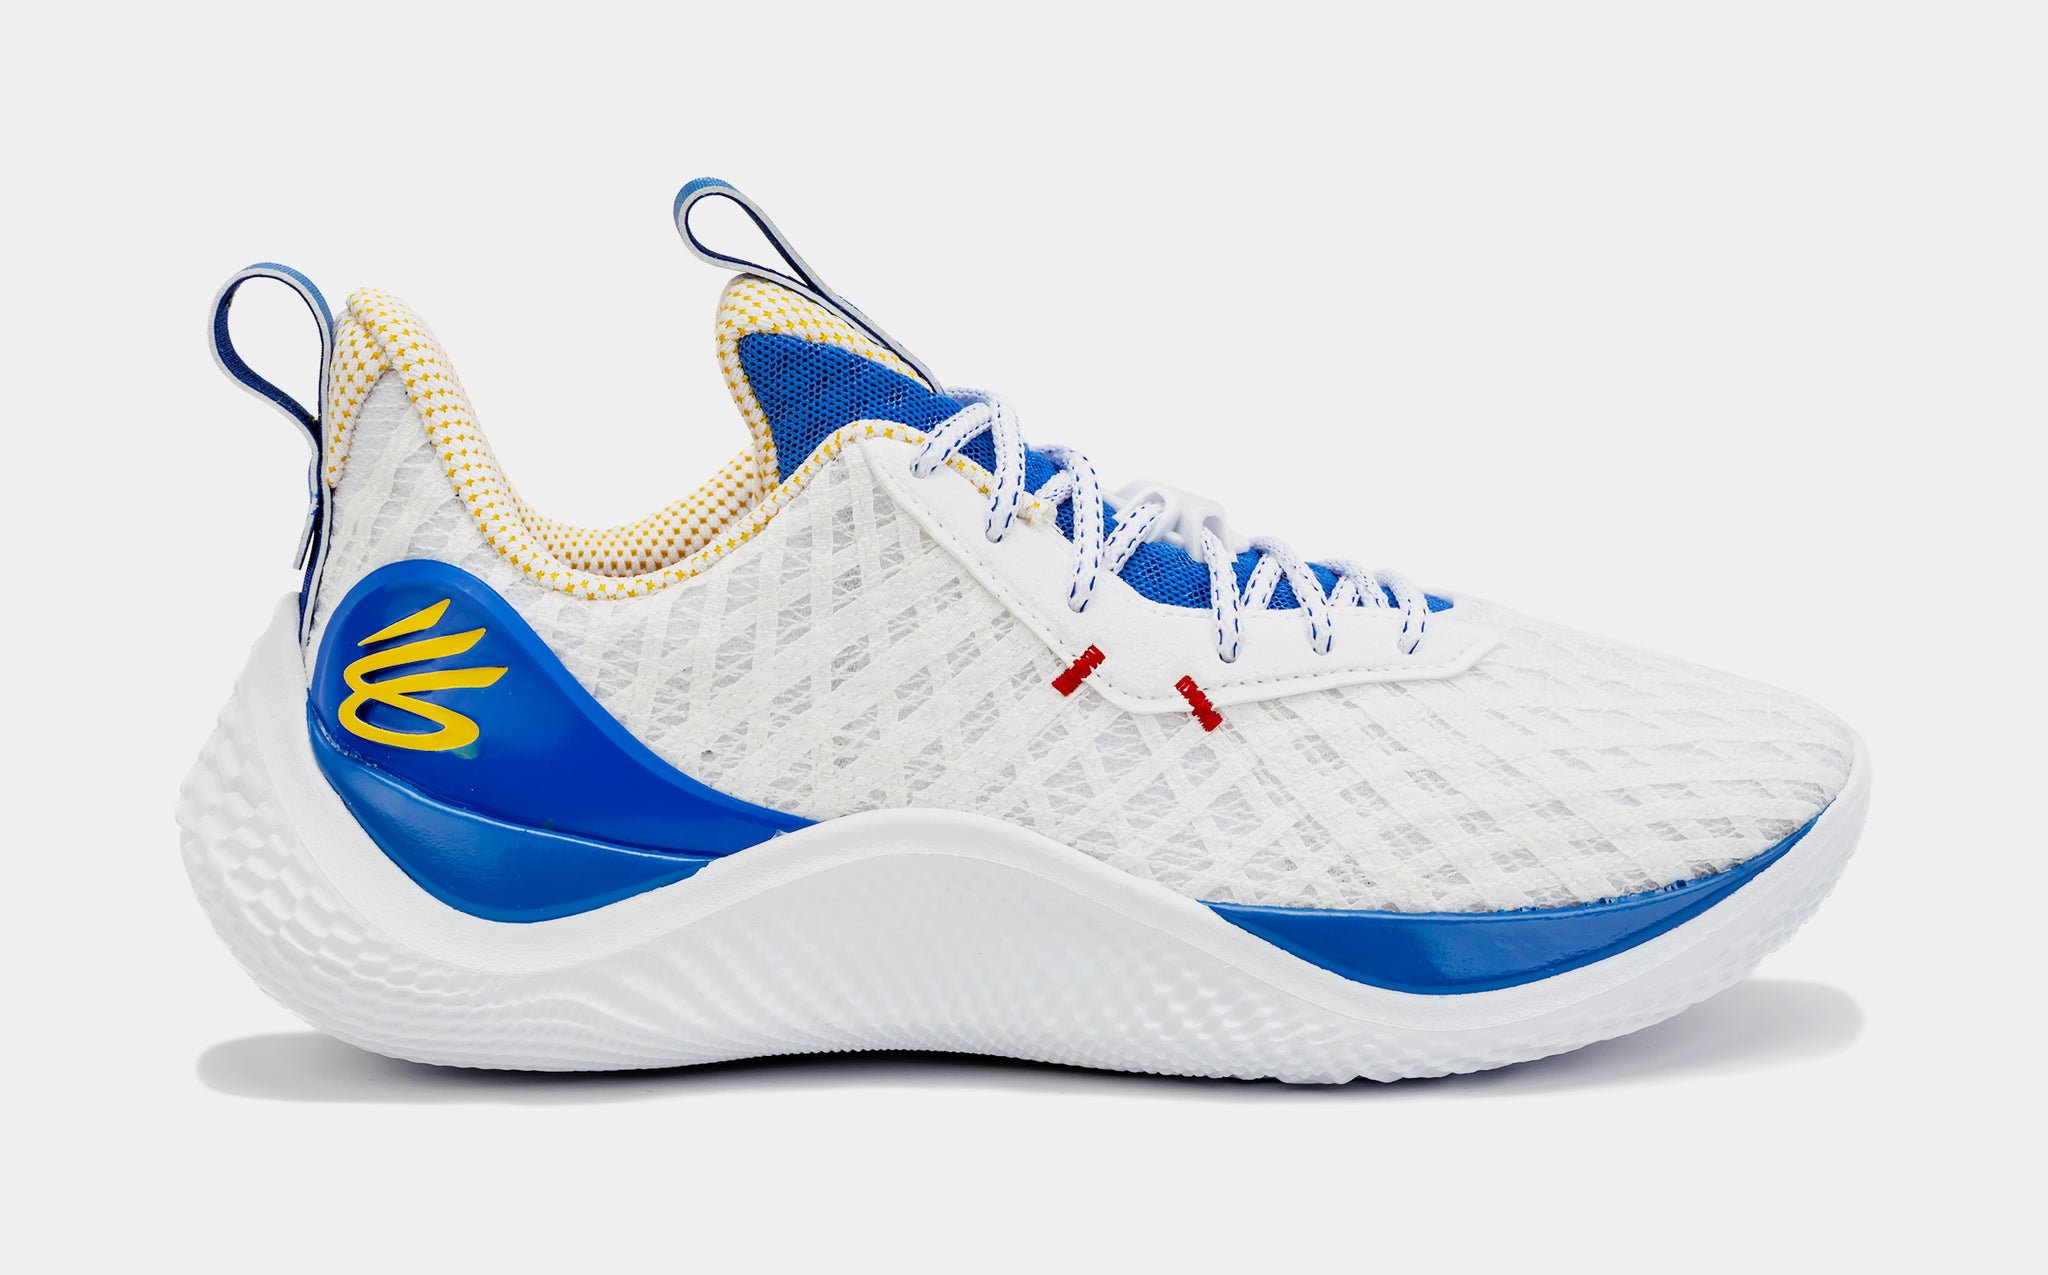 Under Armor Curry 9 - Men's Basketball Shoes